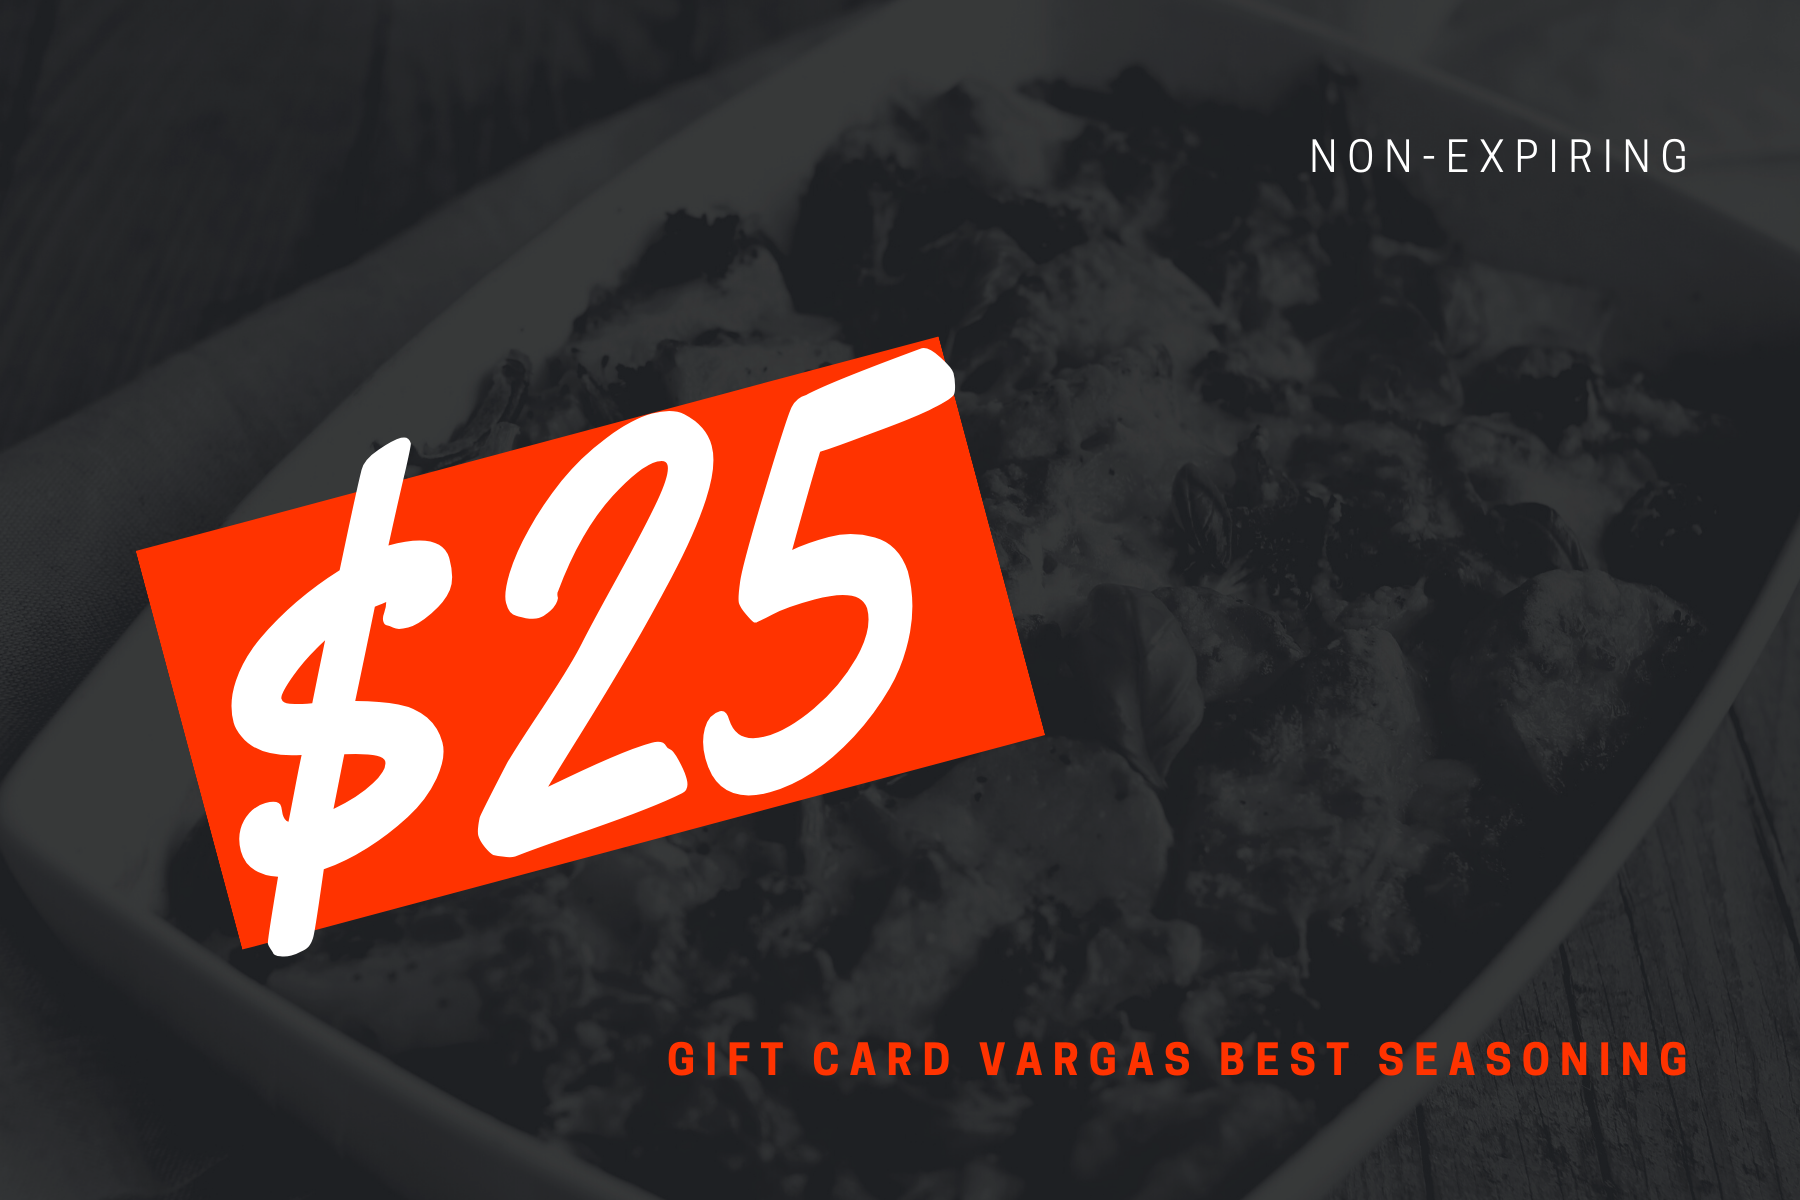 gift card for $25 best seasoning best healthy low sodium 100% All Natural ingredients